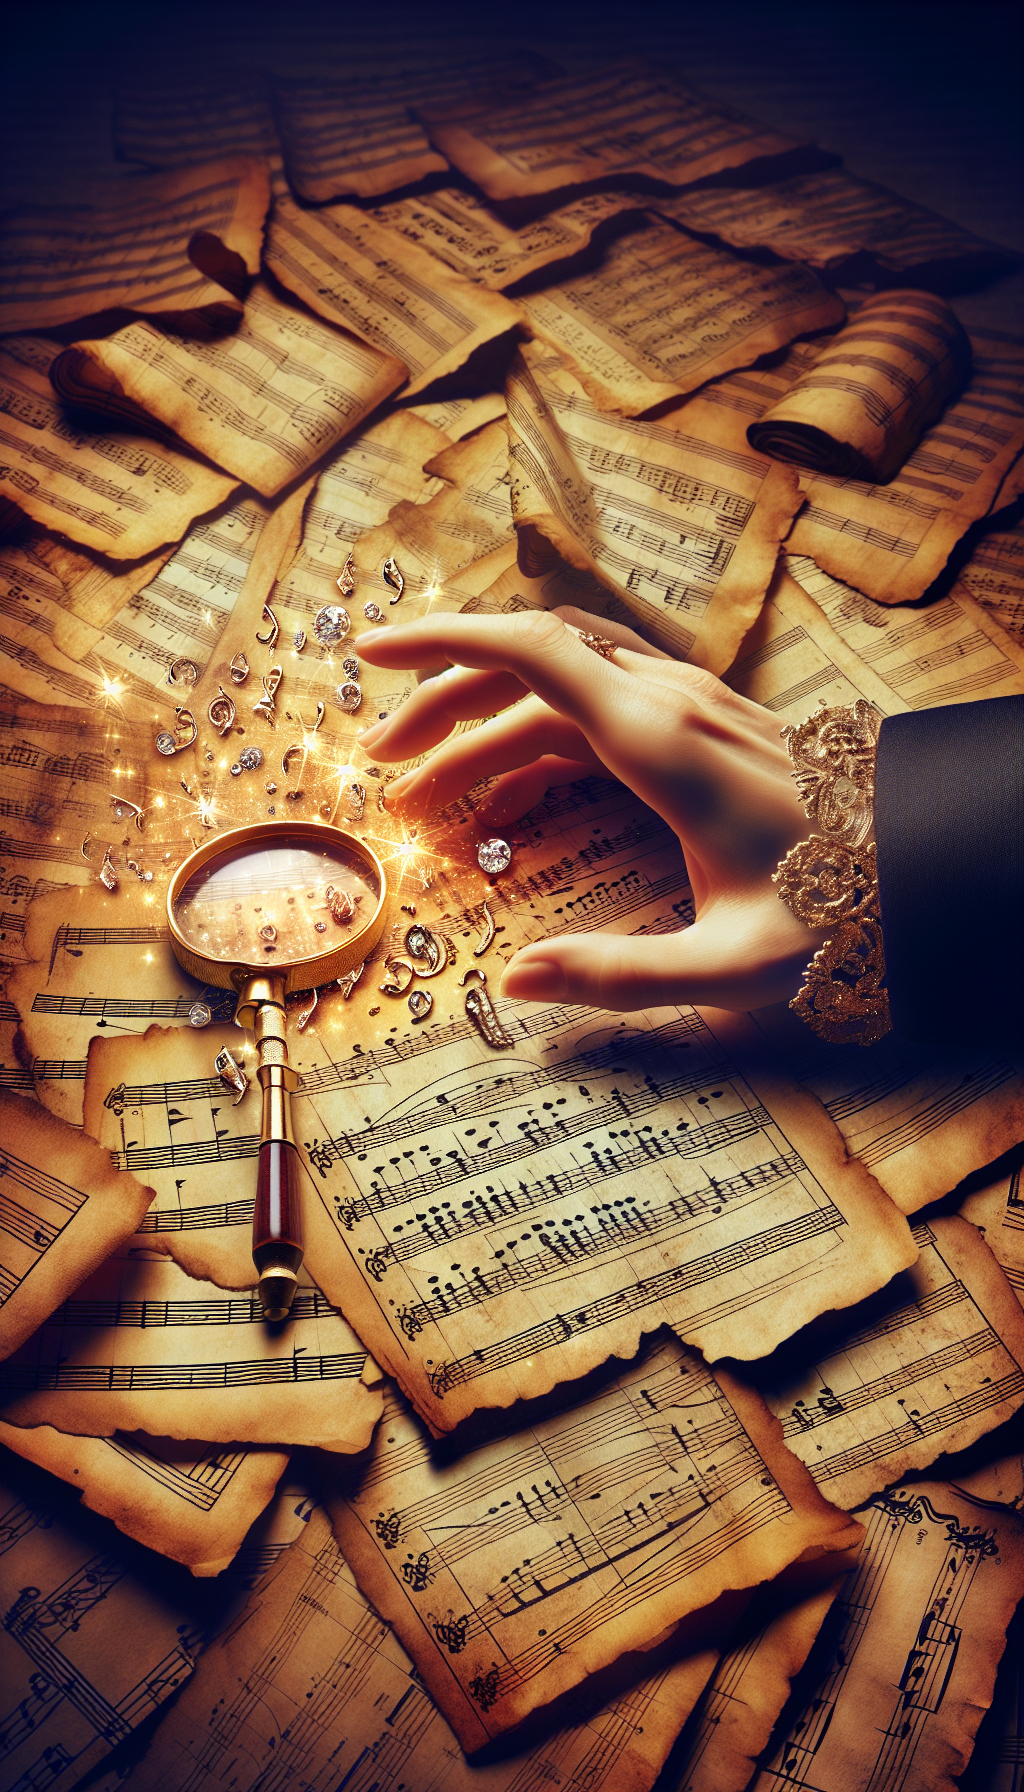 An elegant hand wearing a jeweler's loupe extends over a pile of vintage sheet music, with glimmering musical notes rising like rare gems against a backdrop of weathered parchment. Each shimmering note reflects distinct periods of music composition, symbolizing the invaluable treasures hidden within an antiquated collection. The juxtaposition of an antiquarian ambiance and radiant gemstones encapsulates the theme of rarity and value.